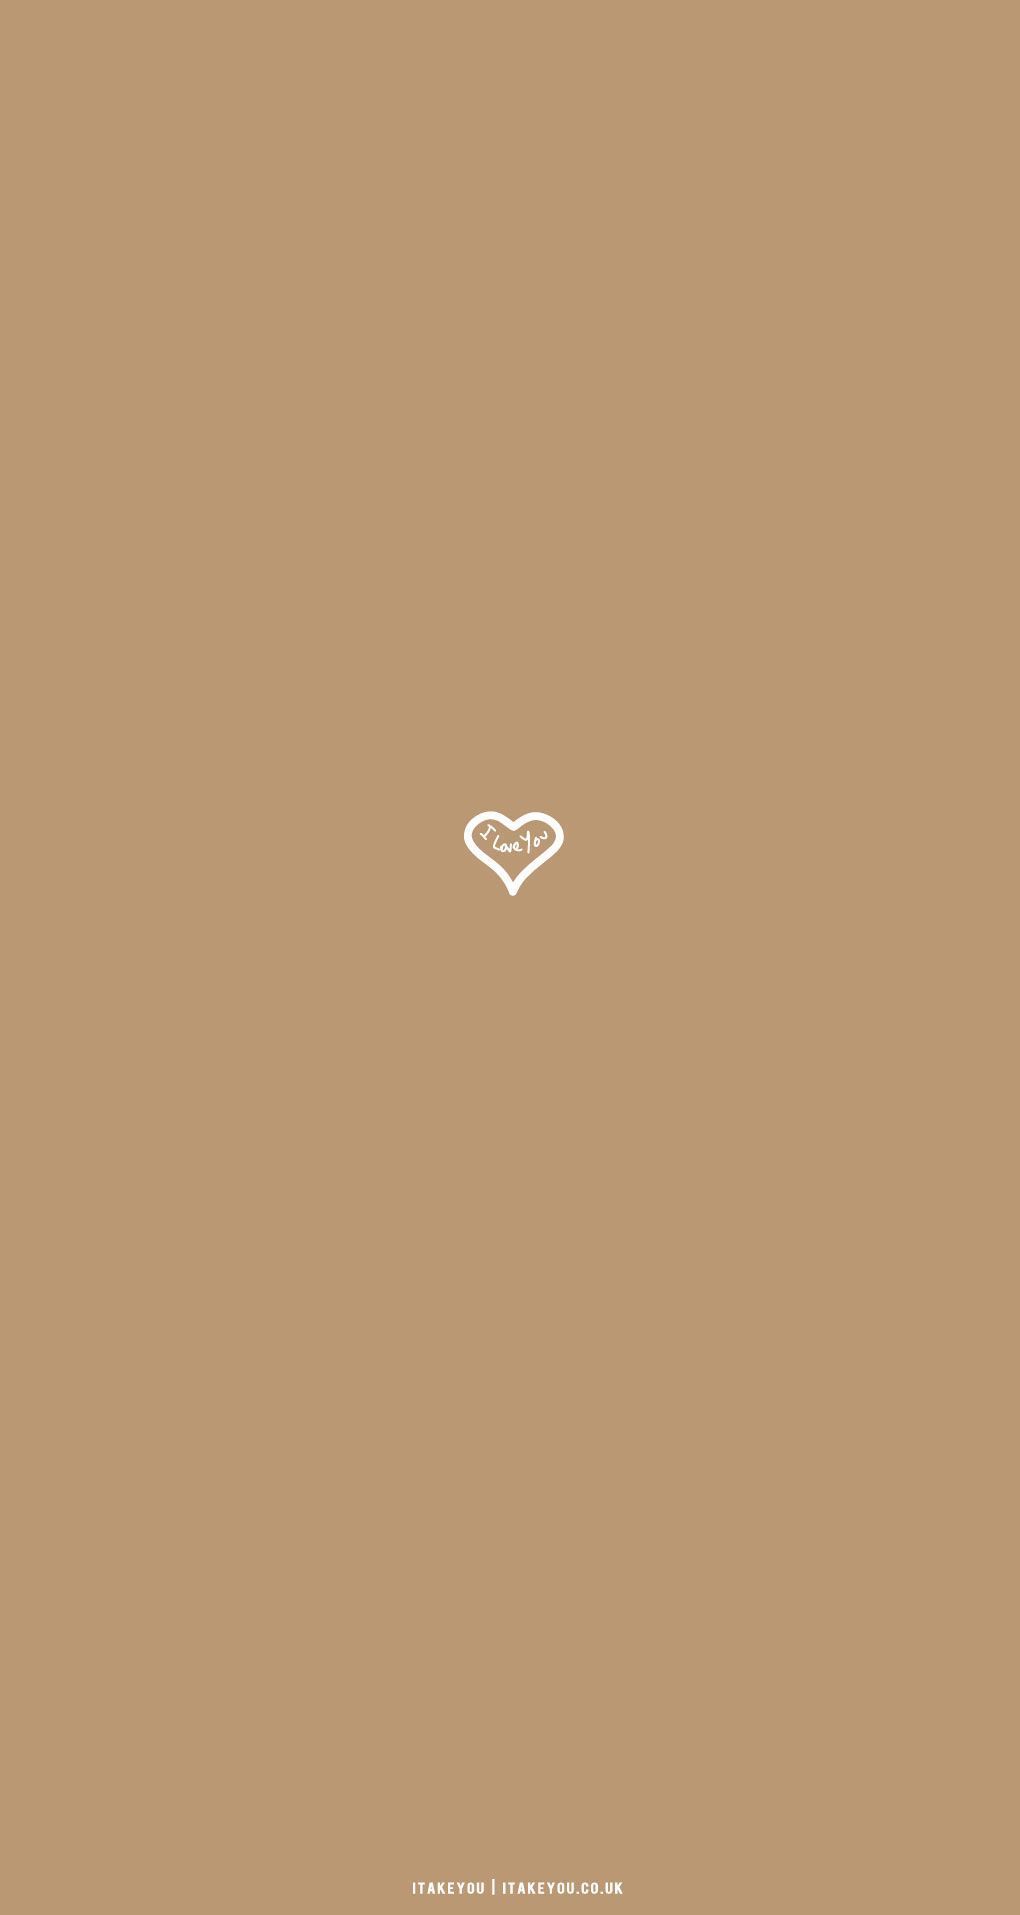 Cute Brown Aesthetic Wallpaper for Phone : Love Heart I Take You. Wedding Readings. Wedding Ideas